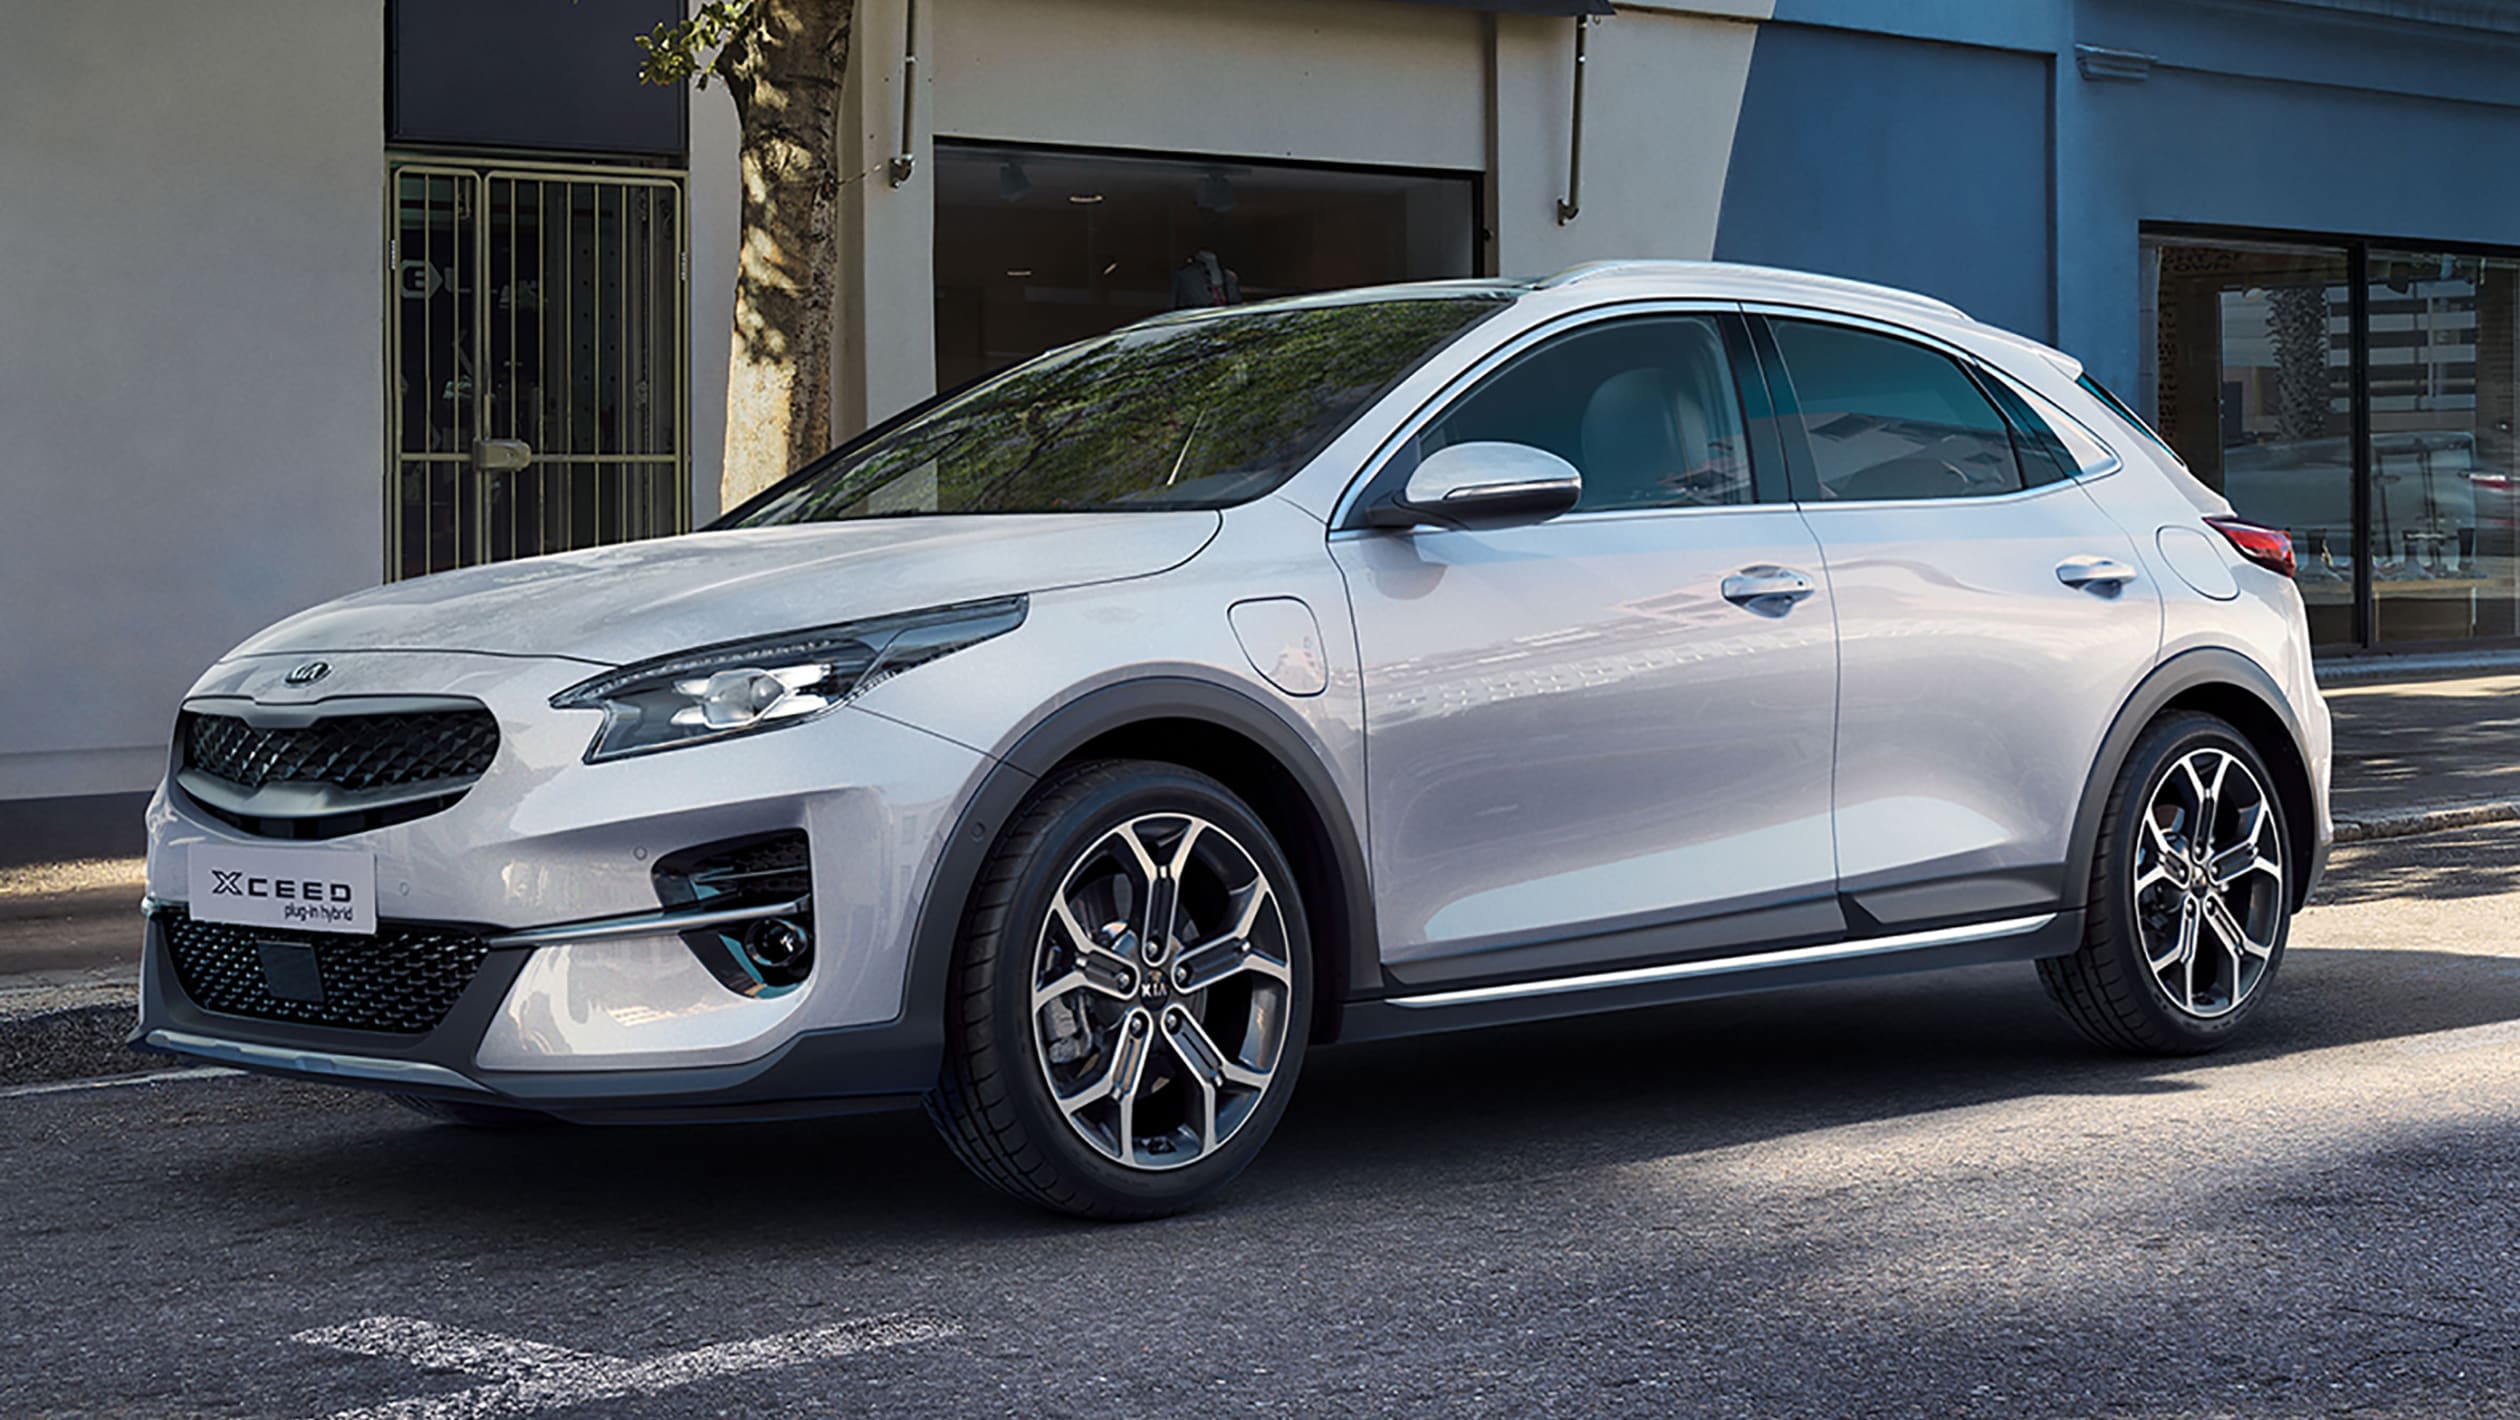 New 2020 Kia XCeed PHEV: prices, specs and release date 